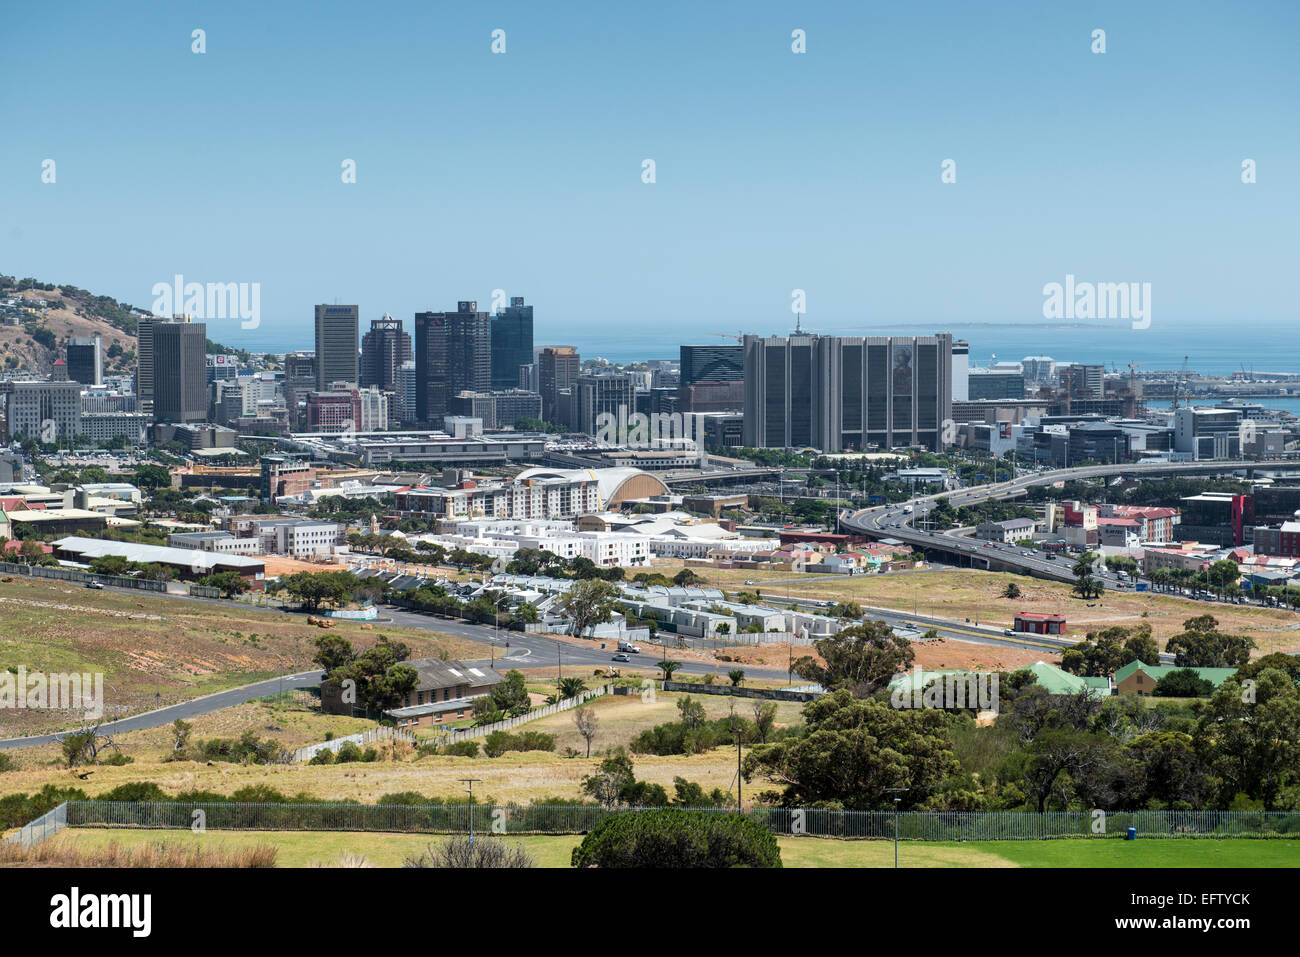 Cape Town city centre and rebuilt District Six with grassland, view from M3 motorway, Cape Town, Western Cape, South Africa Stock Photo